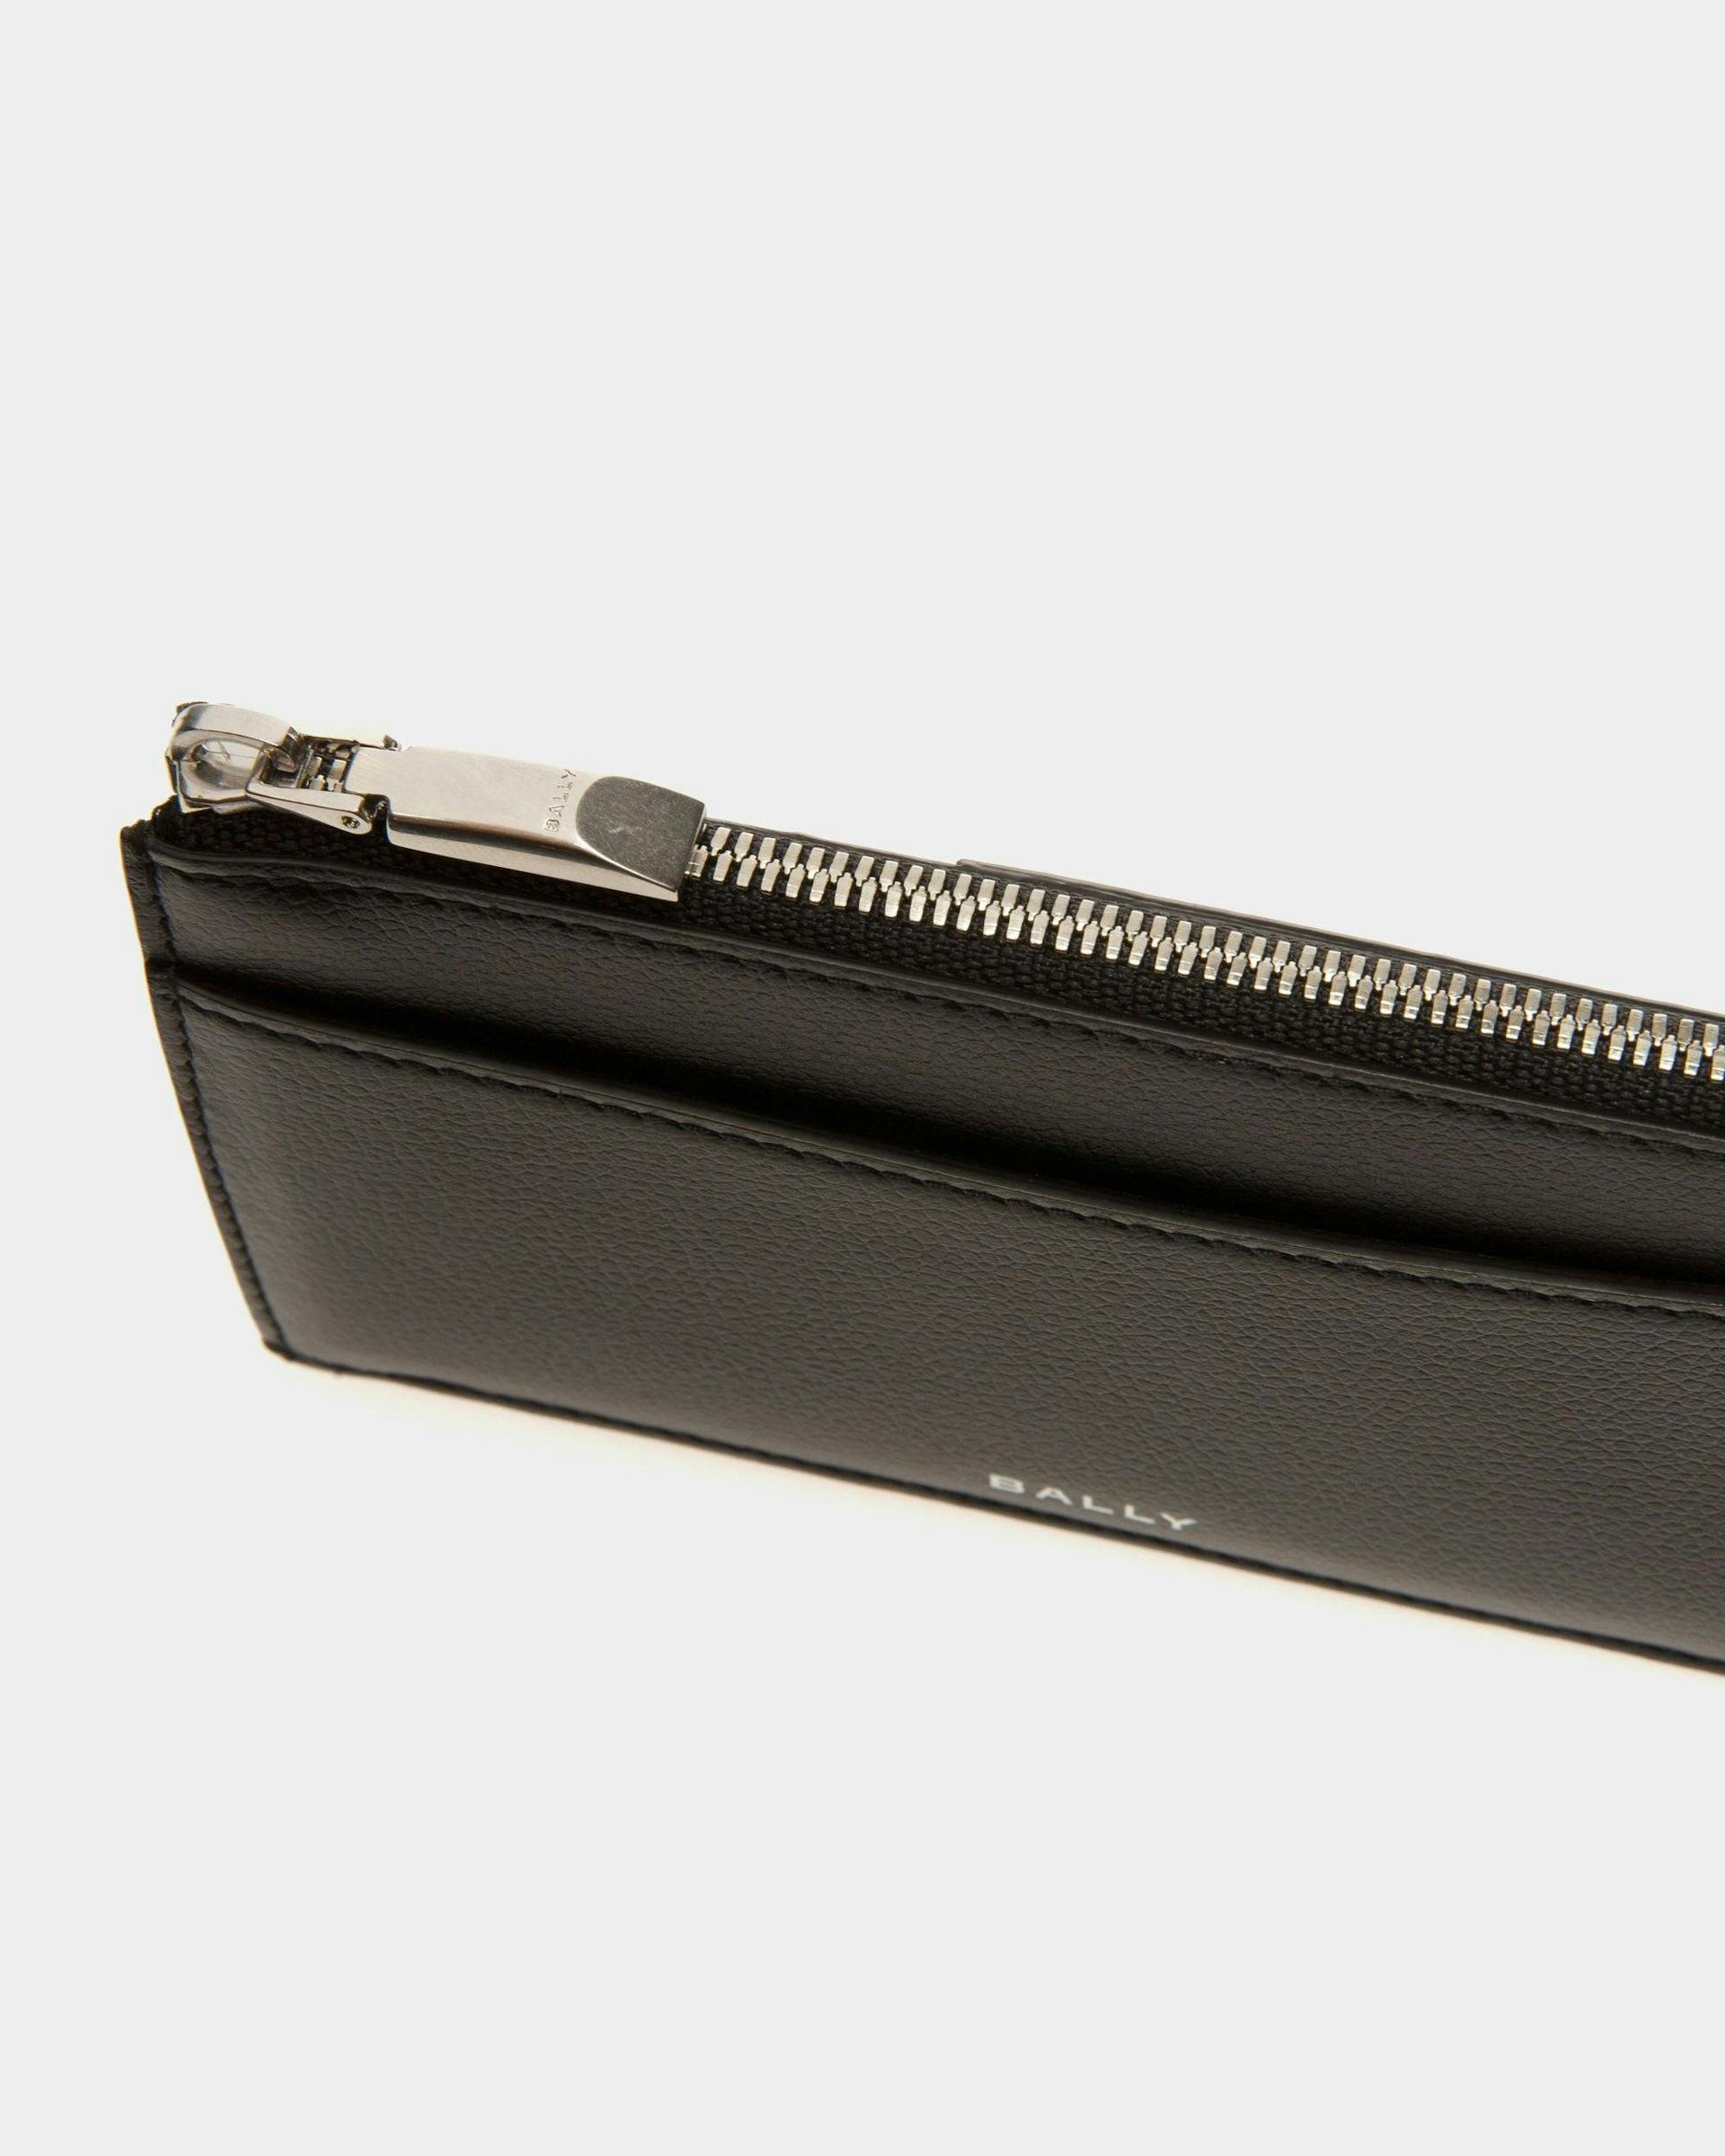 Banque Business Card Holder In Black Leather - Men's - Bally - 04